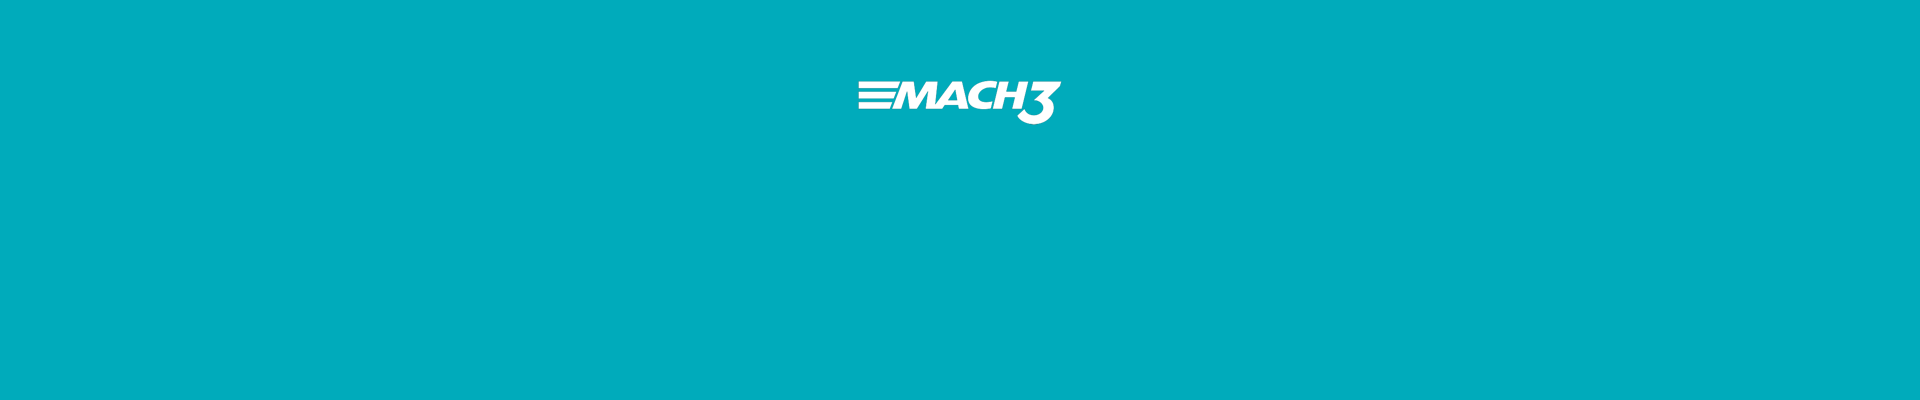 Mach3 Text on Turquoise background | Gillette UK